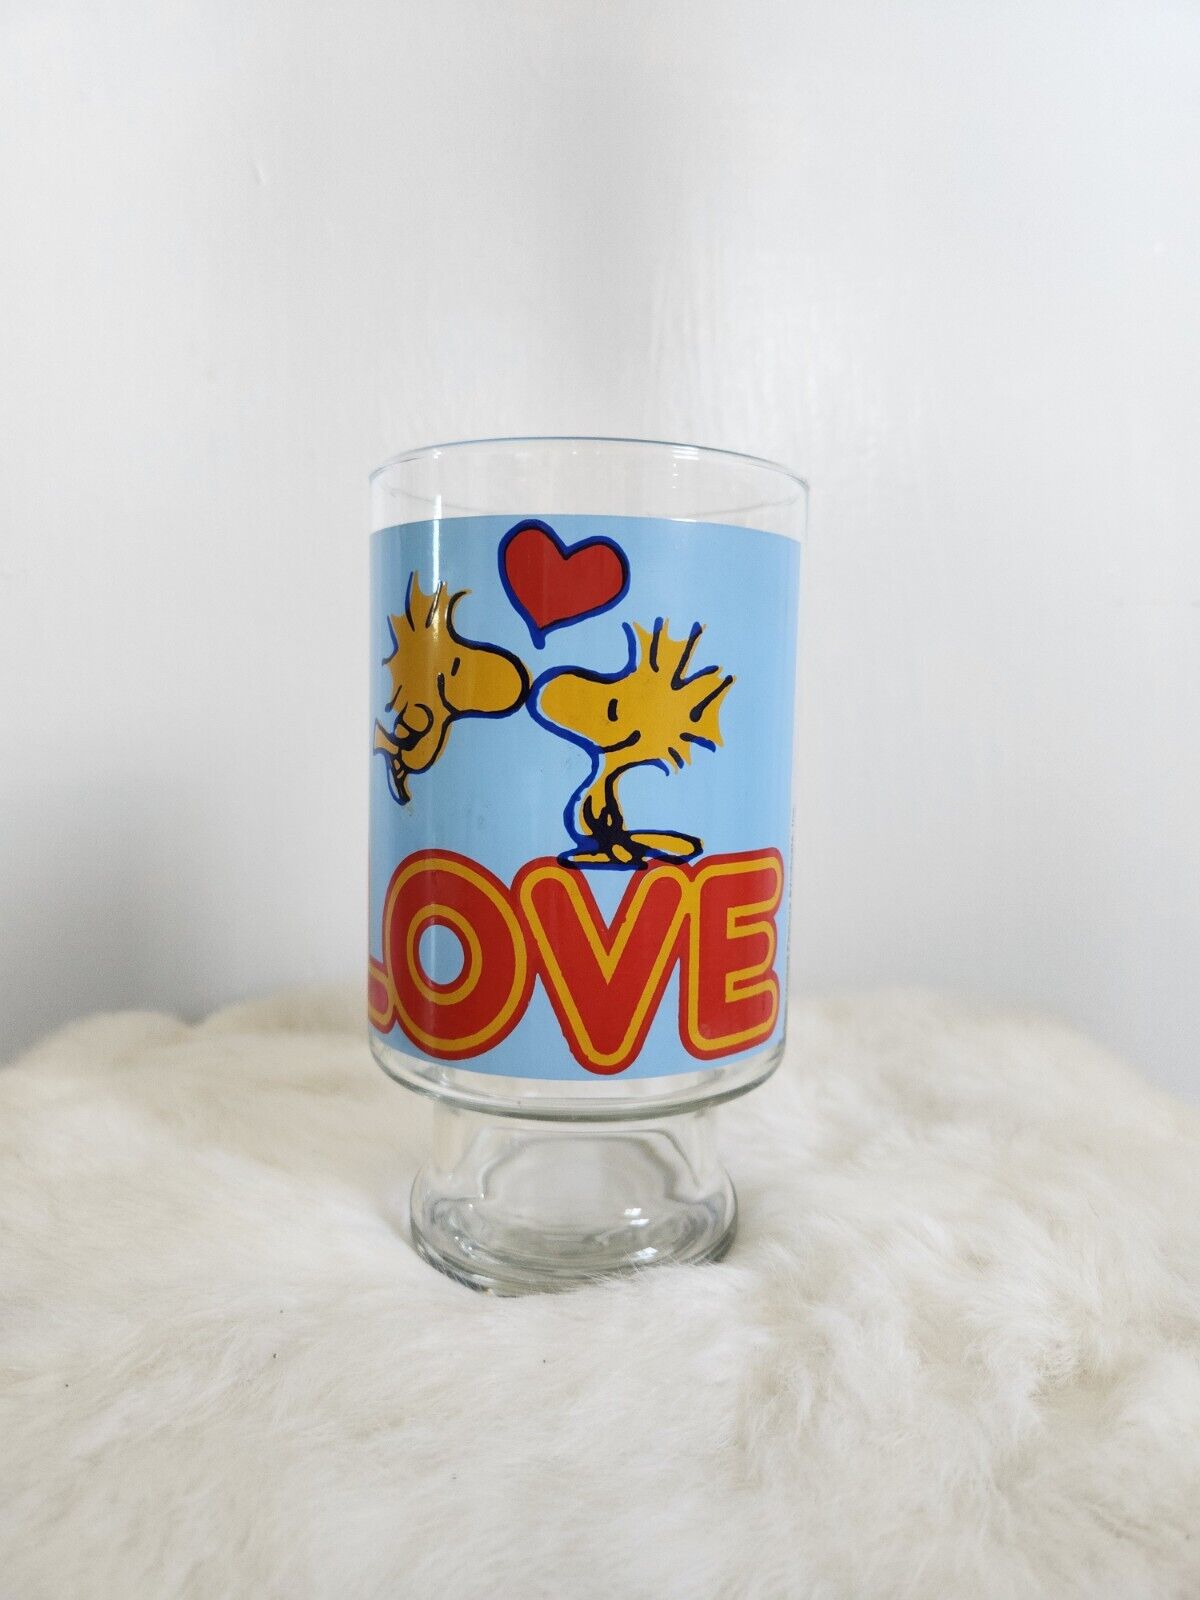 WOODSTOCK LOVE LARGE DRINKING GLASS 1965, PEANUTS, SNOOPY